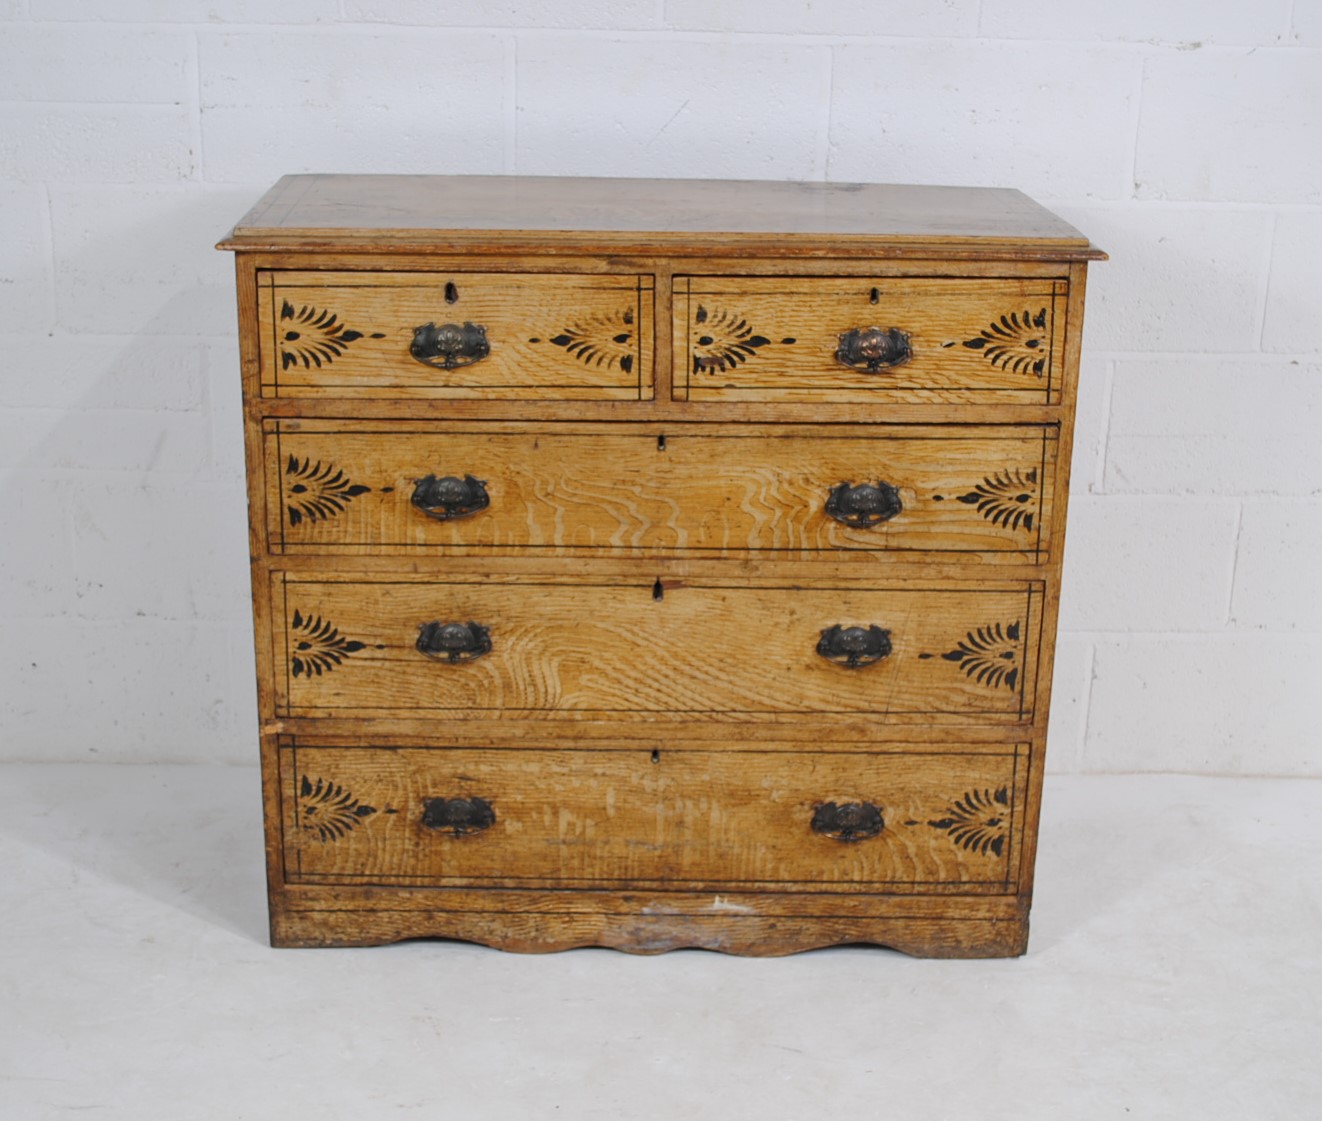 An antique pine chest of five drawers, with painted decoration and metal Art Nouveau handles -